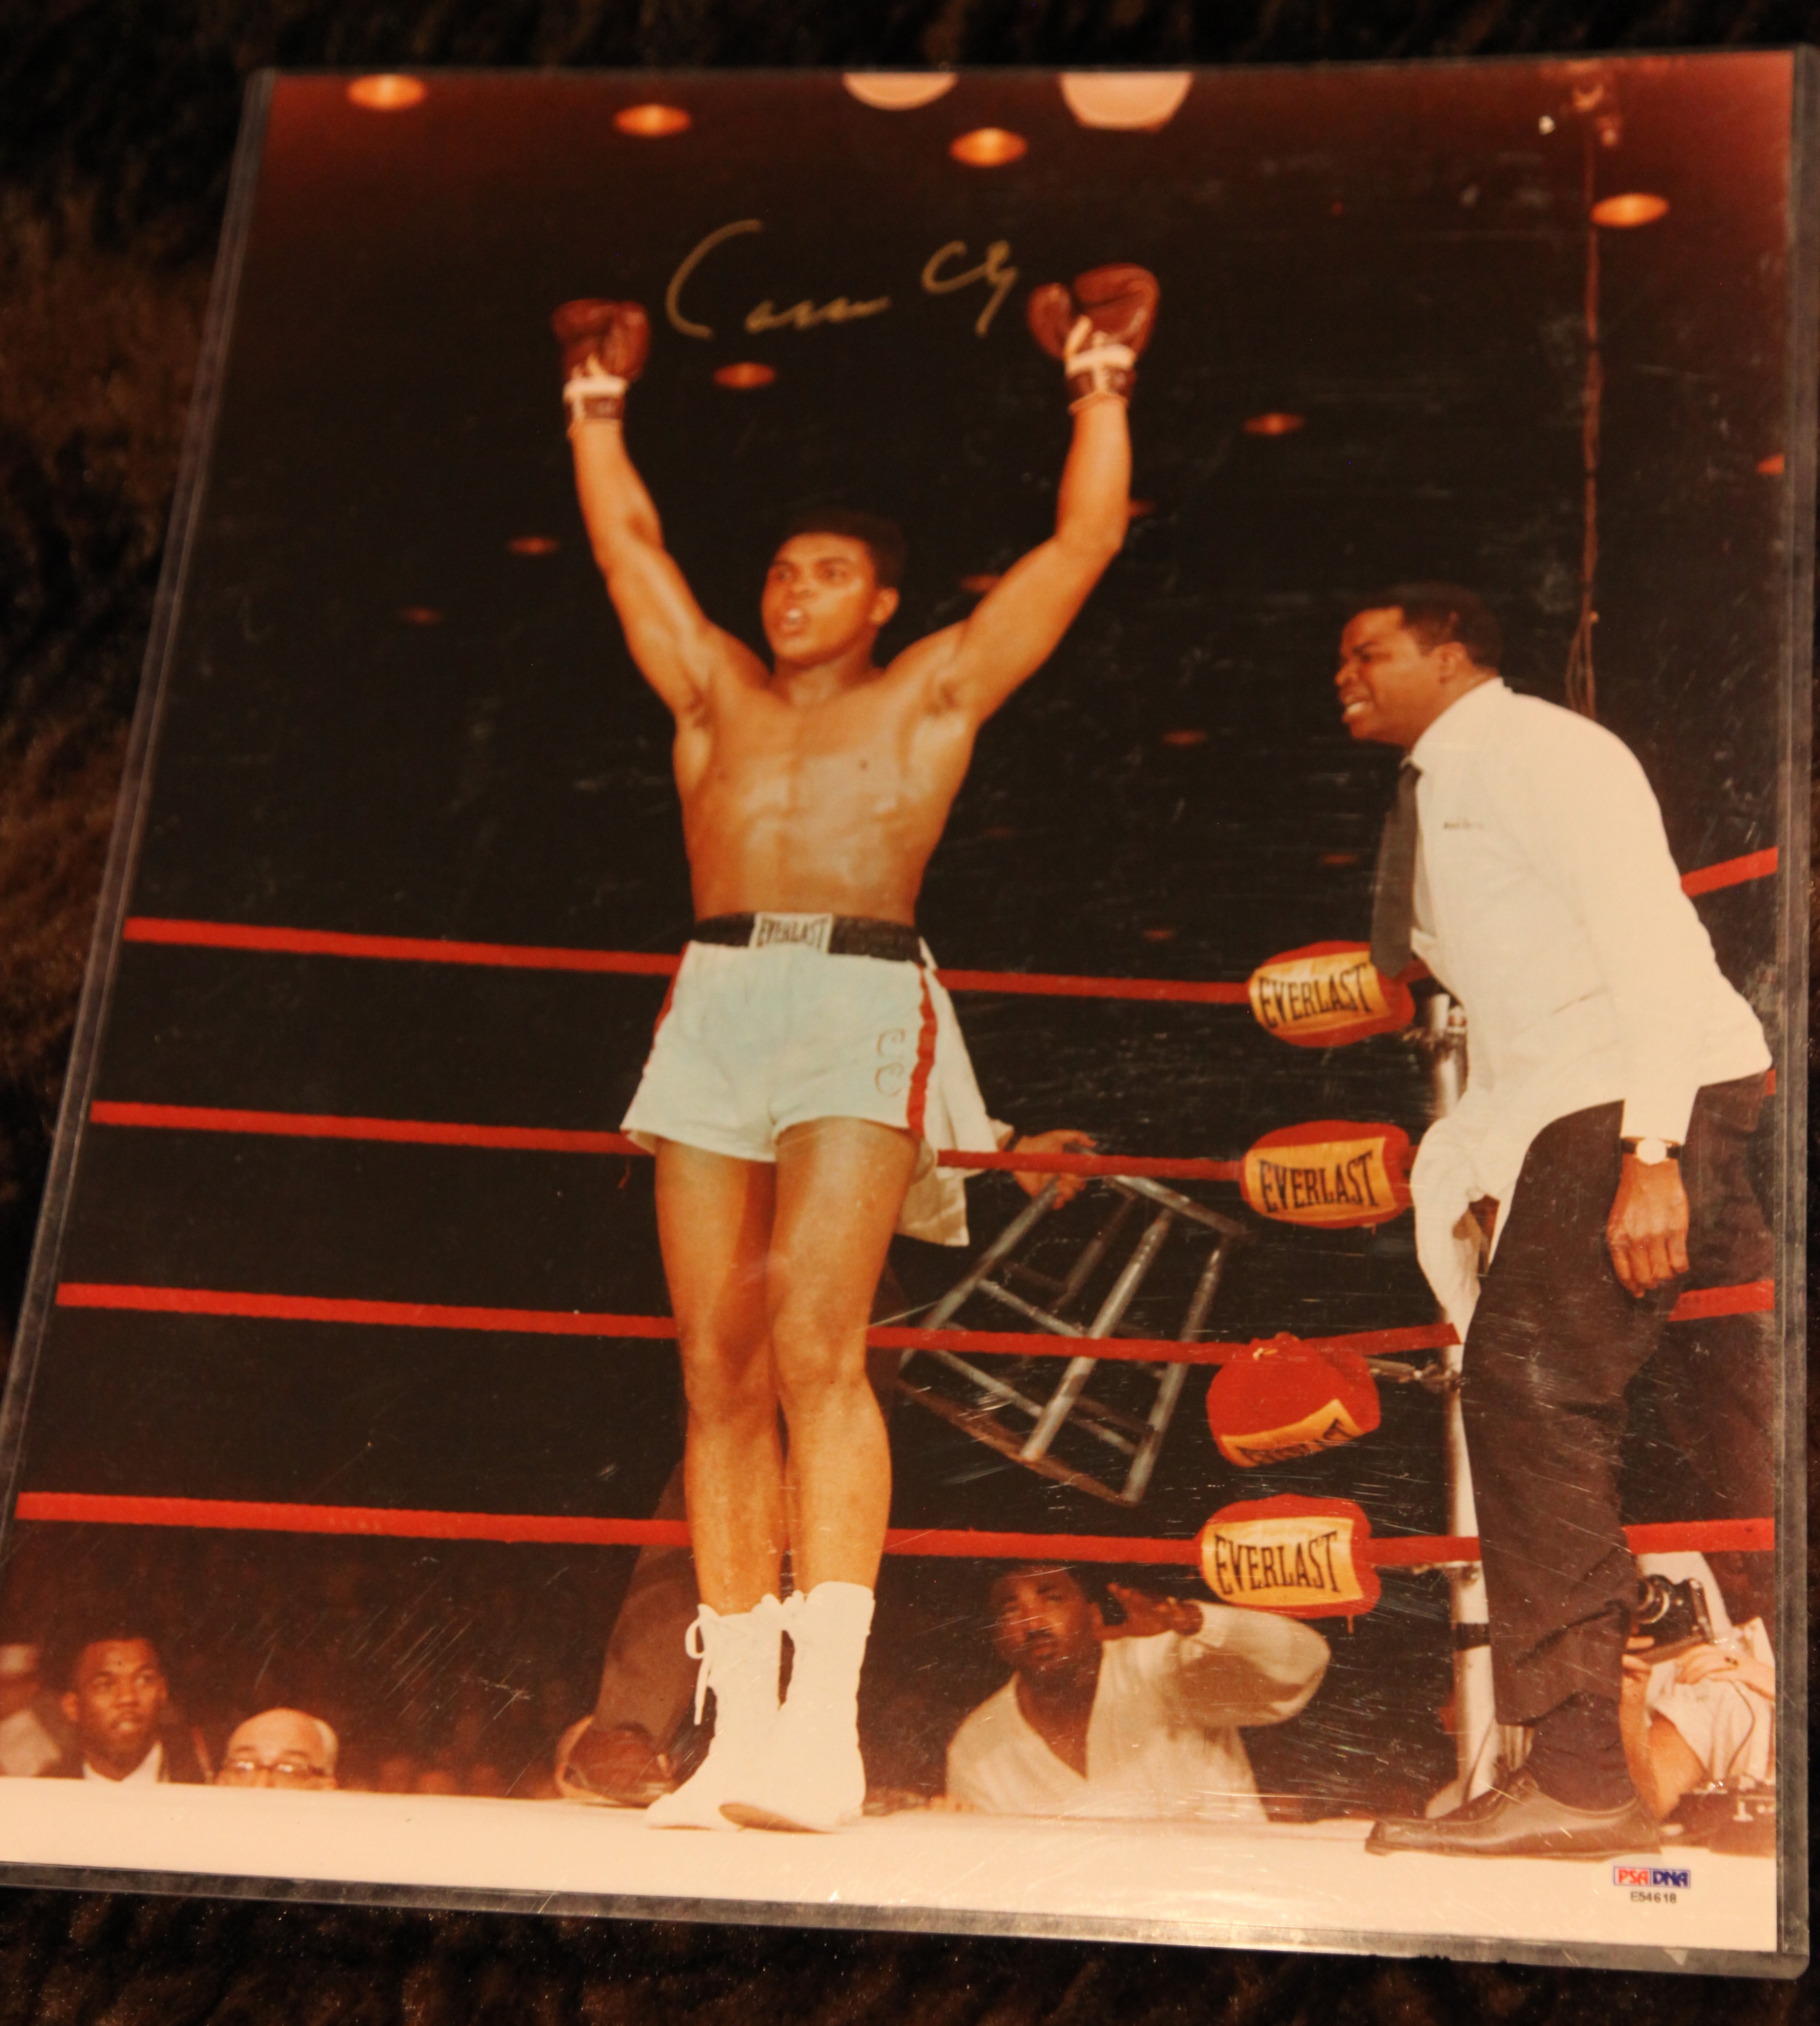 16x20 Signed "Rare Signature" of Muhammad Ali "aka" Cassicus Clay before he became a Muslim   Comes with Letter of Authenticity